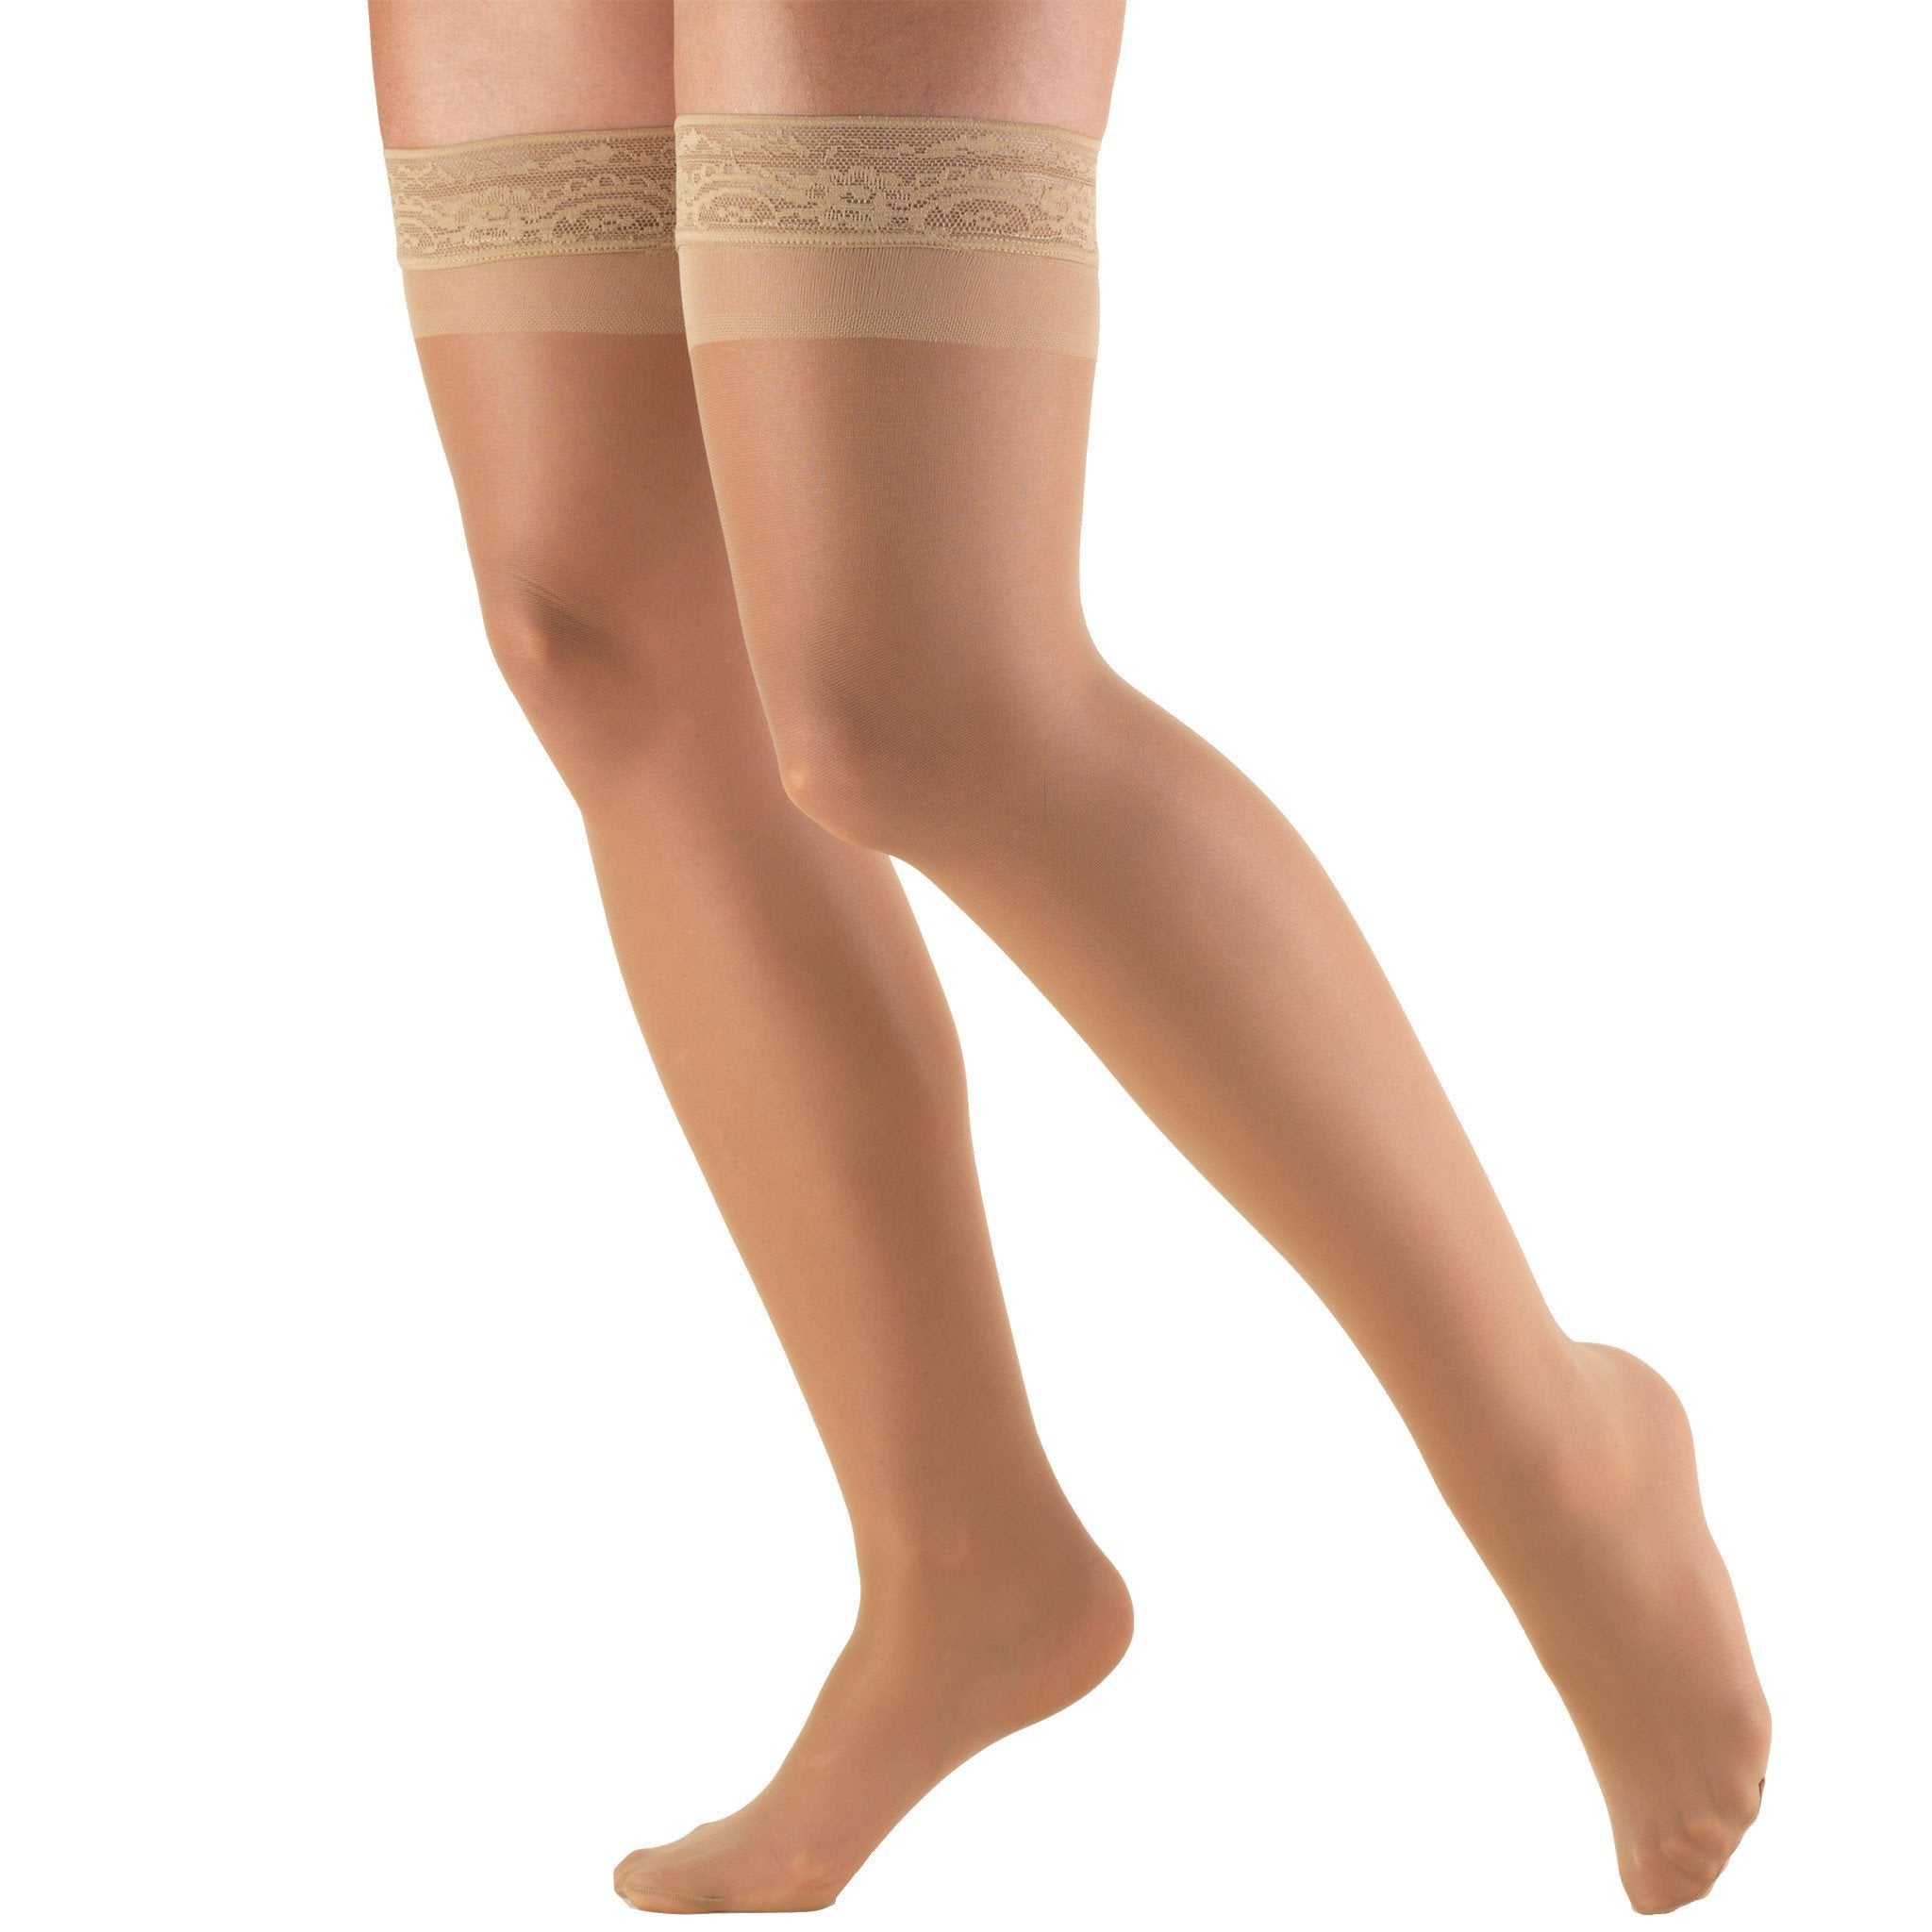 Sheer Pantyhose Graduated Medium Compression - Beige – Mums and Bumps